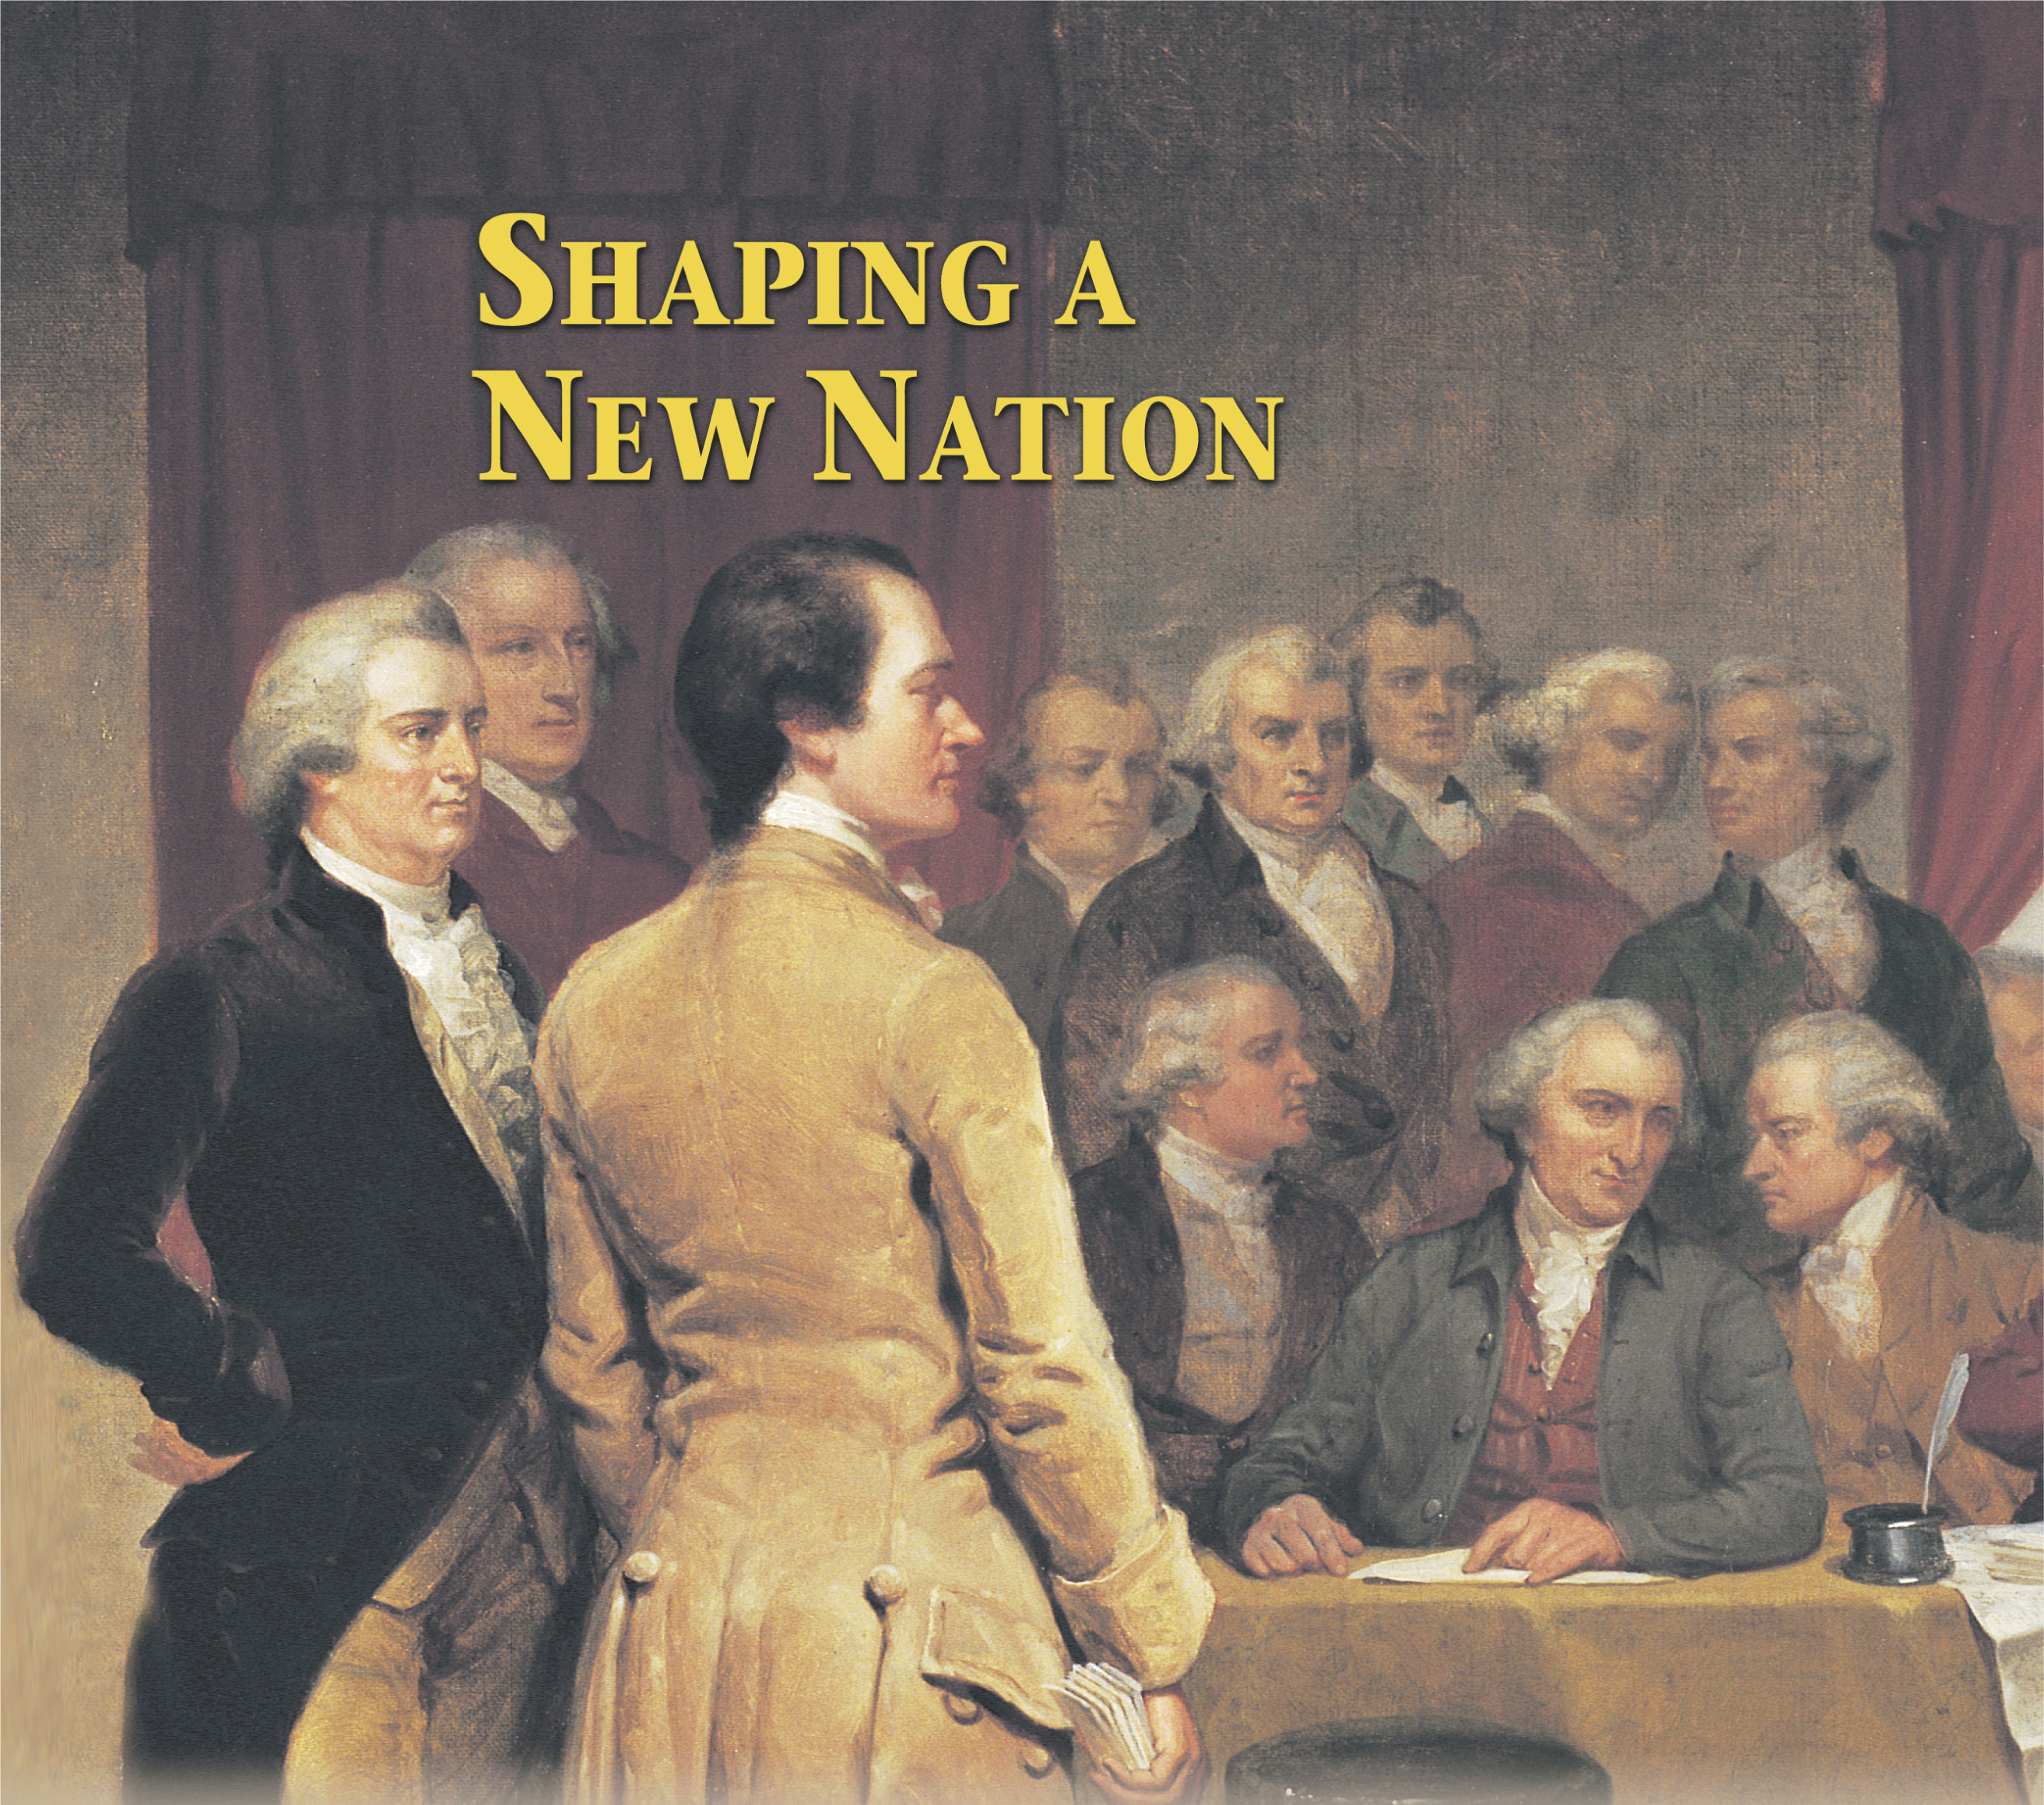 A
title: Shaping a new Nation.